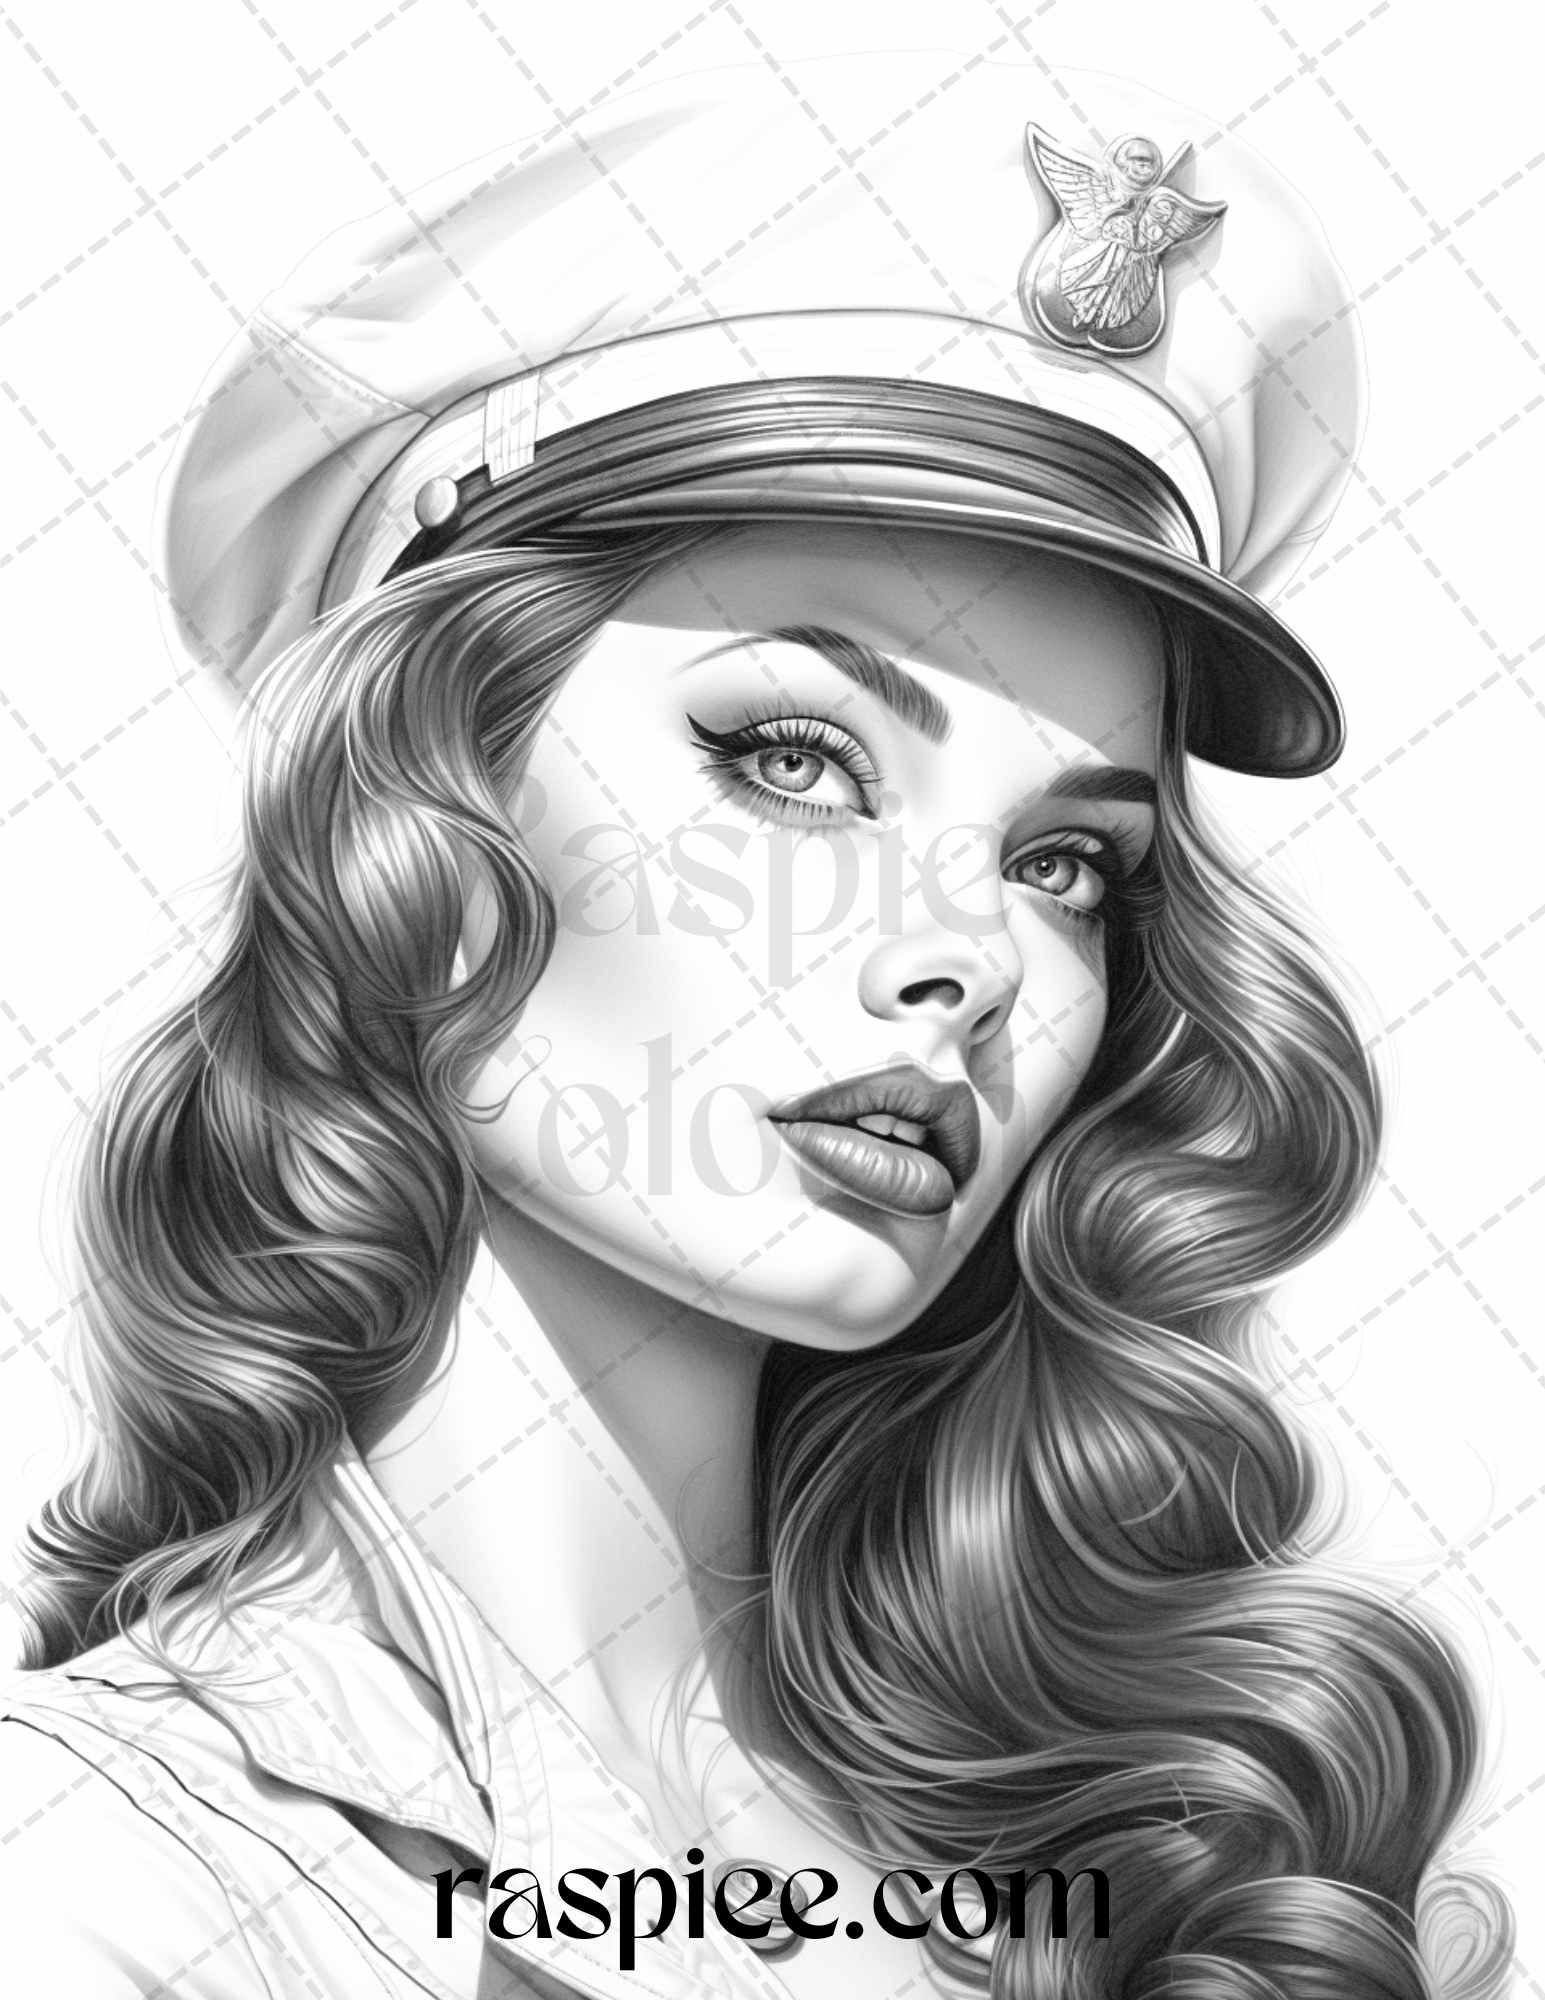 grayscale coloring pages, printable for adults, sailor pin-up girls, instant download, nautical theme coloring page for adults, portrait coloring pages for adults